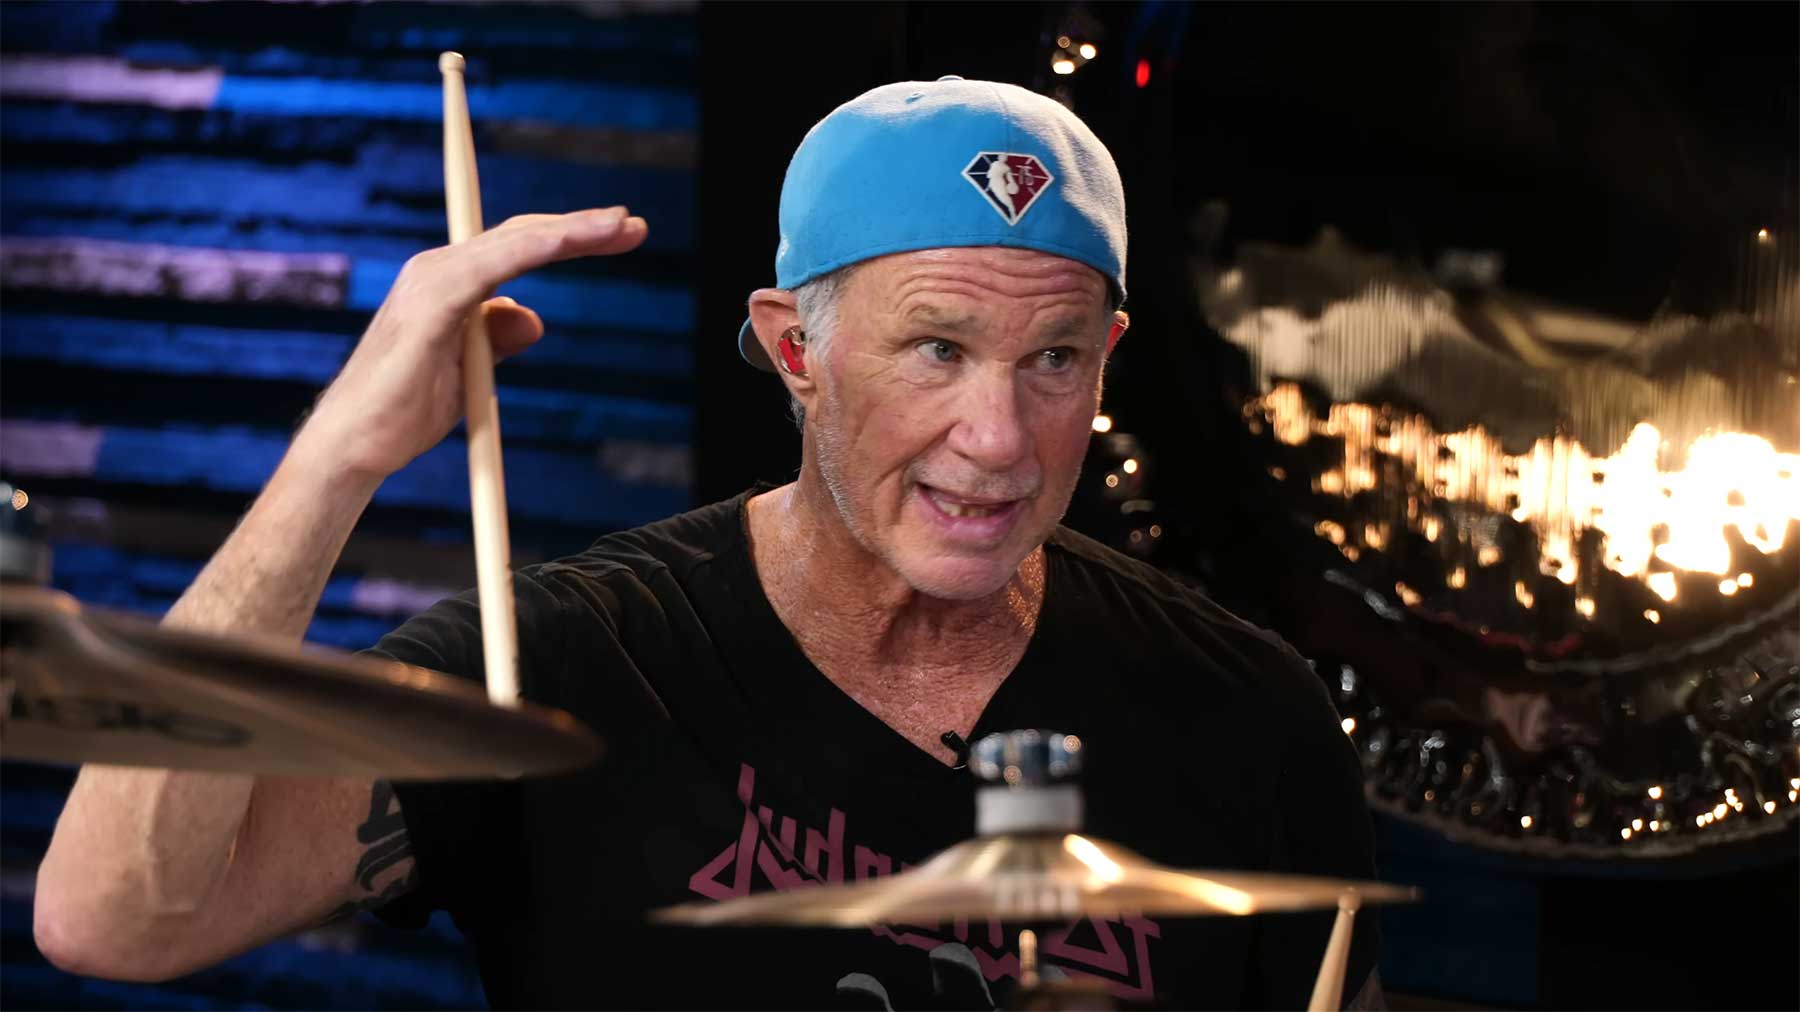 Red-Hot-Chili-Peppers-Schlagzeuger Chad Smith im Drum-Interview